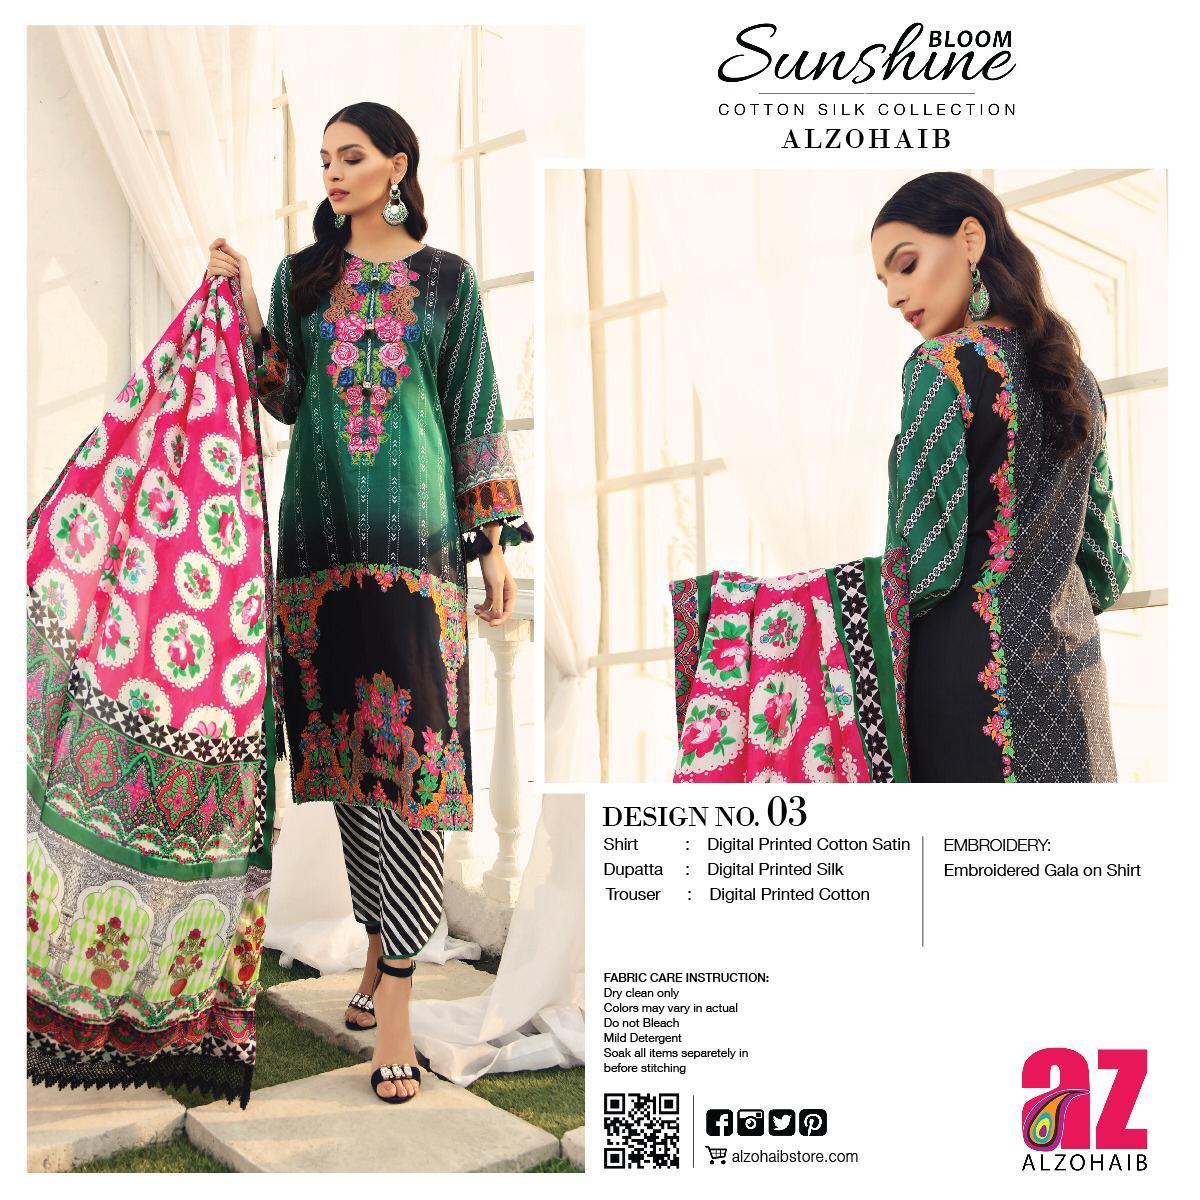 Sunshine Bloom Cotton Silk Embroidered Lawn Collection By Al Zohaib Textiles